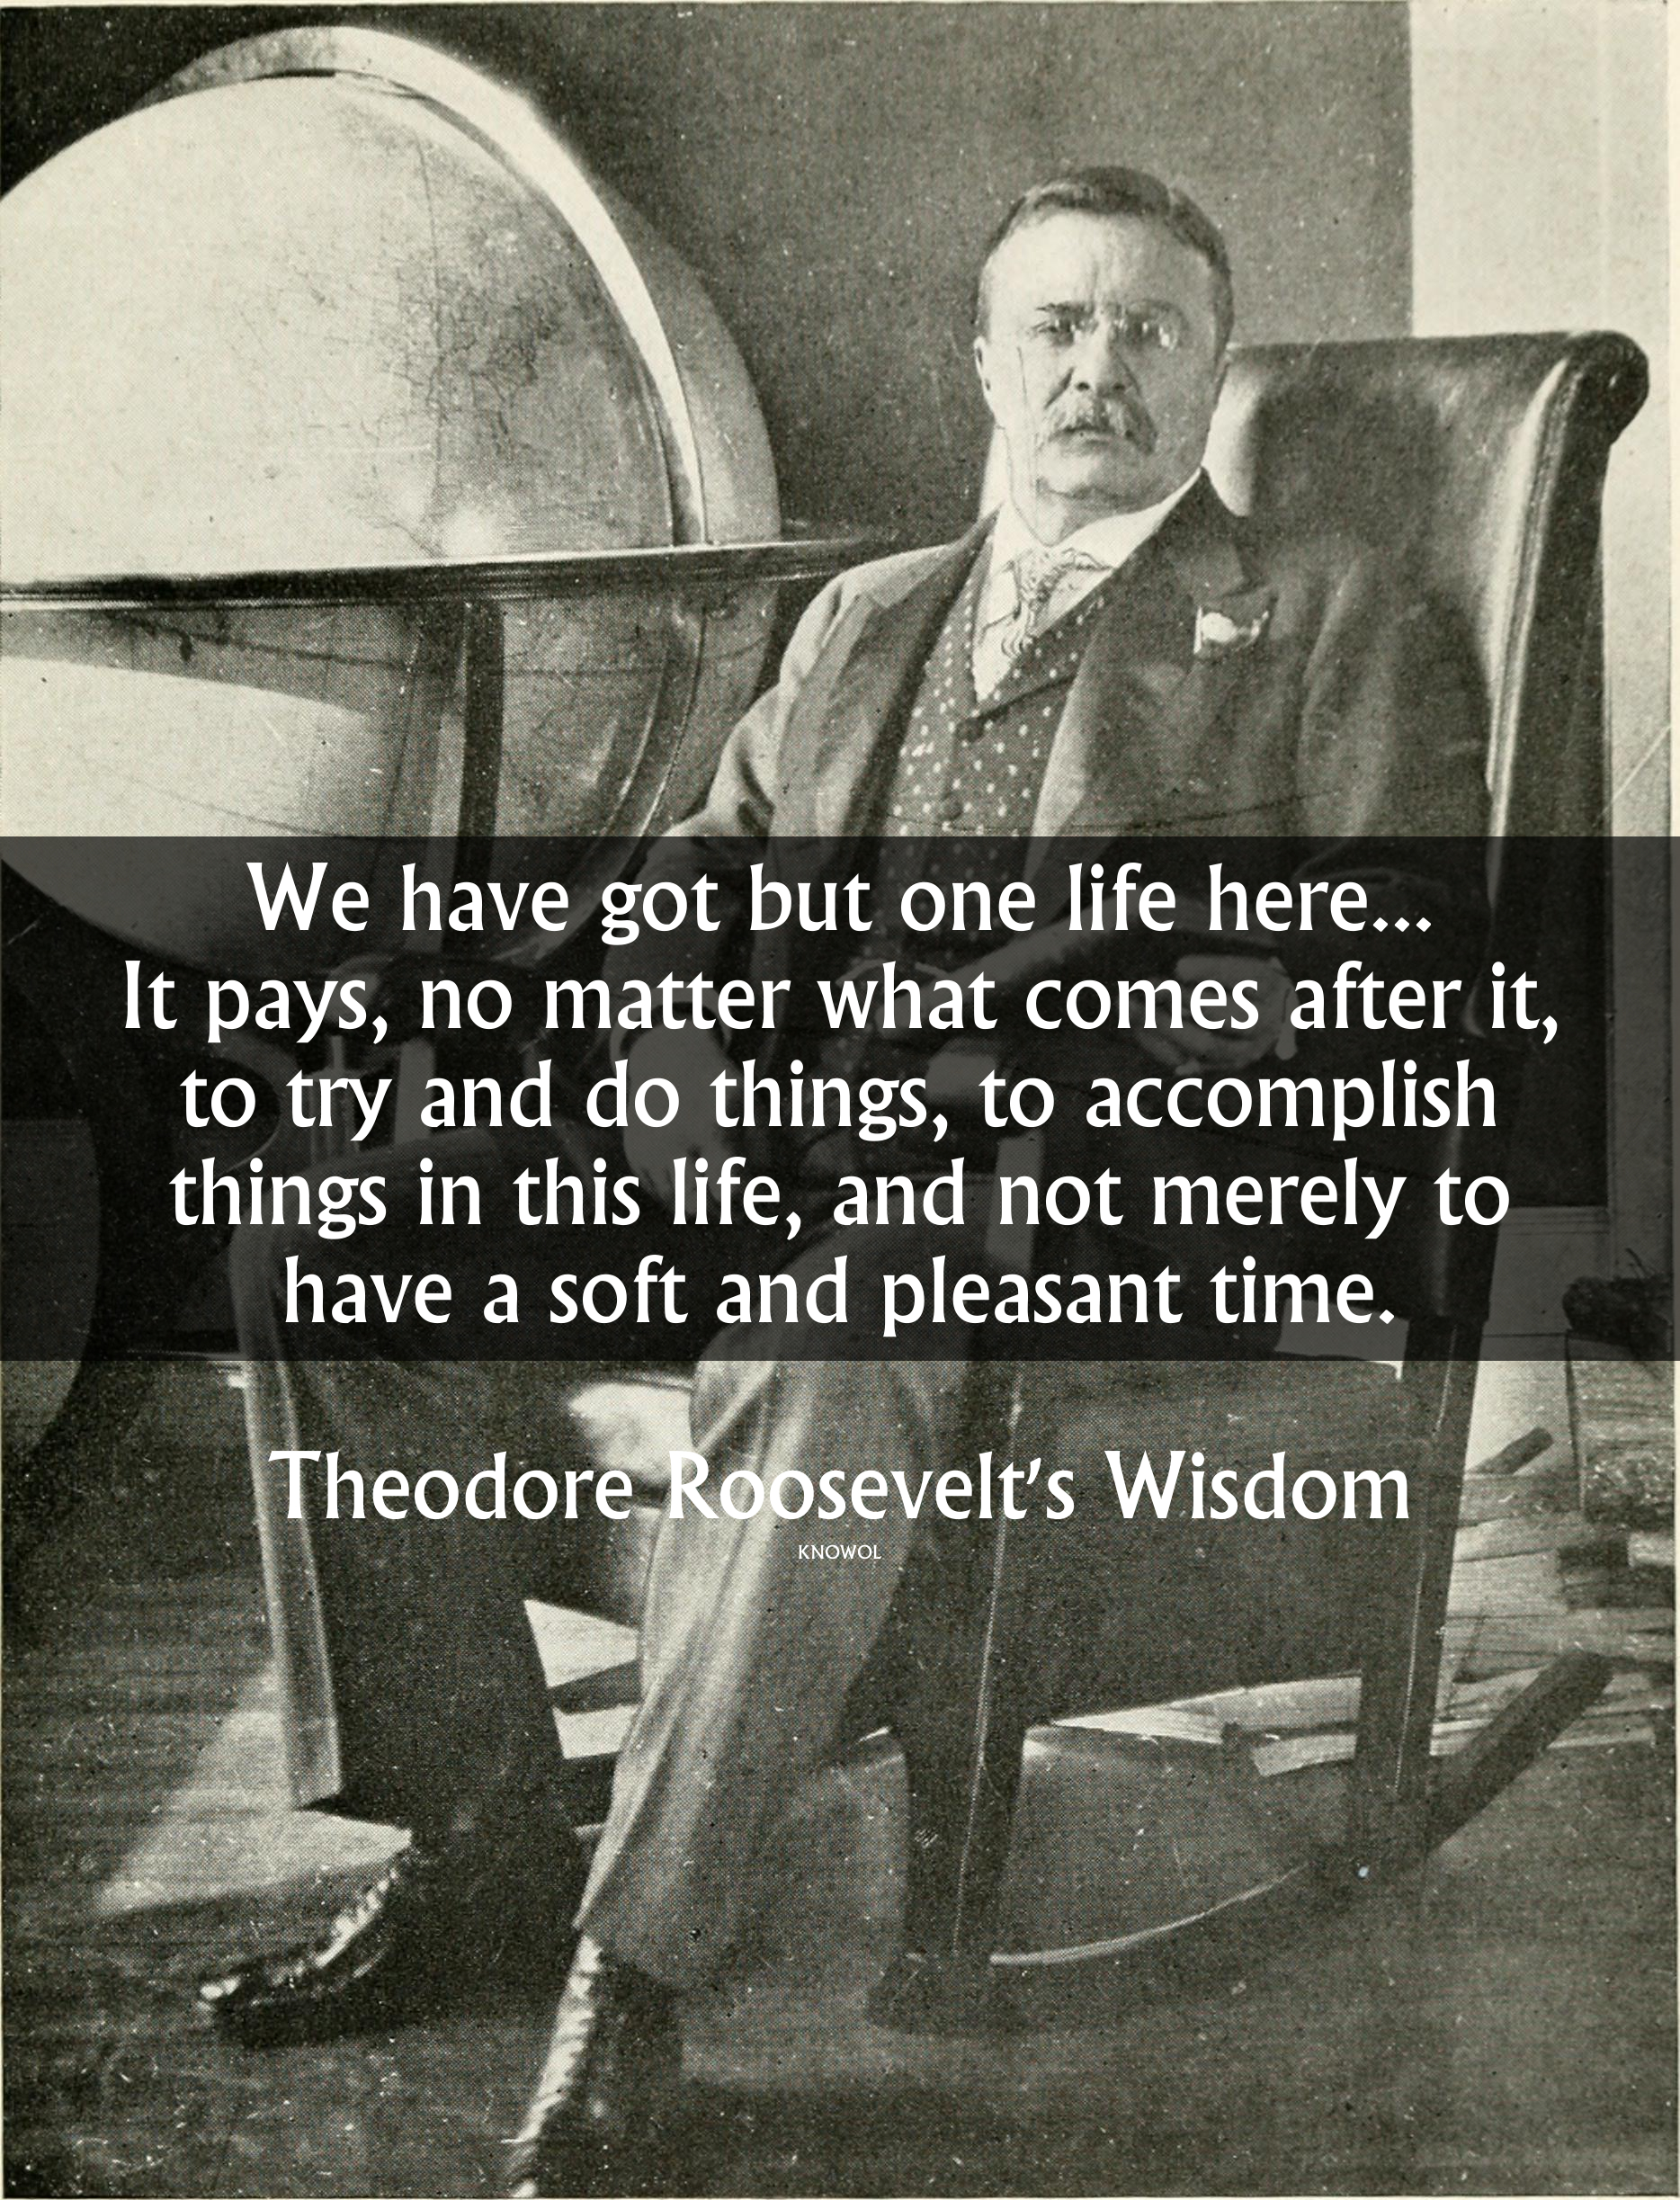 theodore-roosevelt-quote-07 - KNOWOL